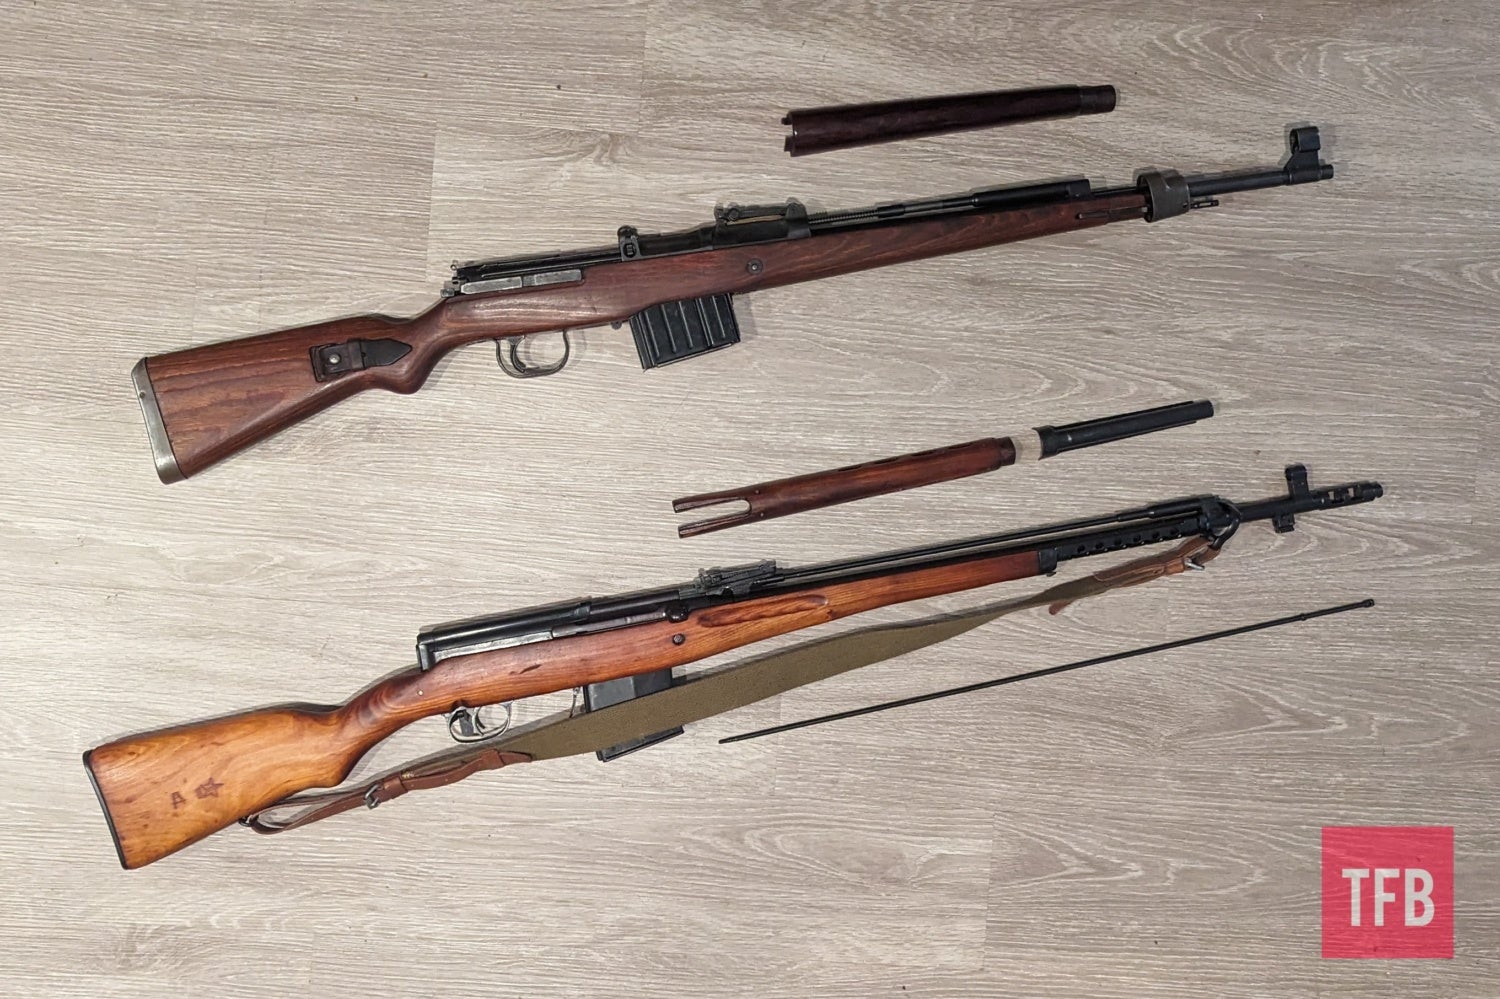 SVT-40 and K.43 partially stripped showing their gas systems.